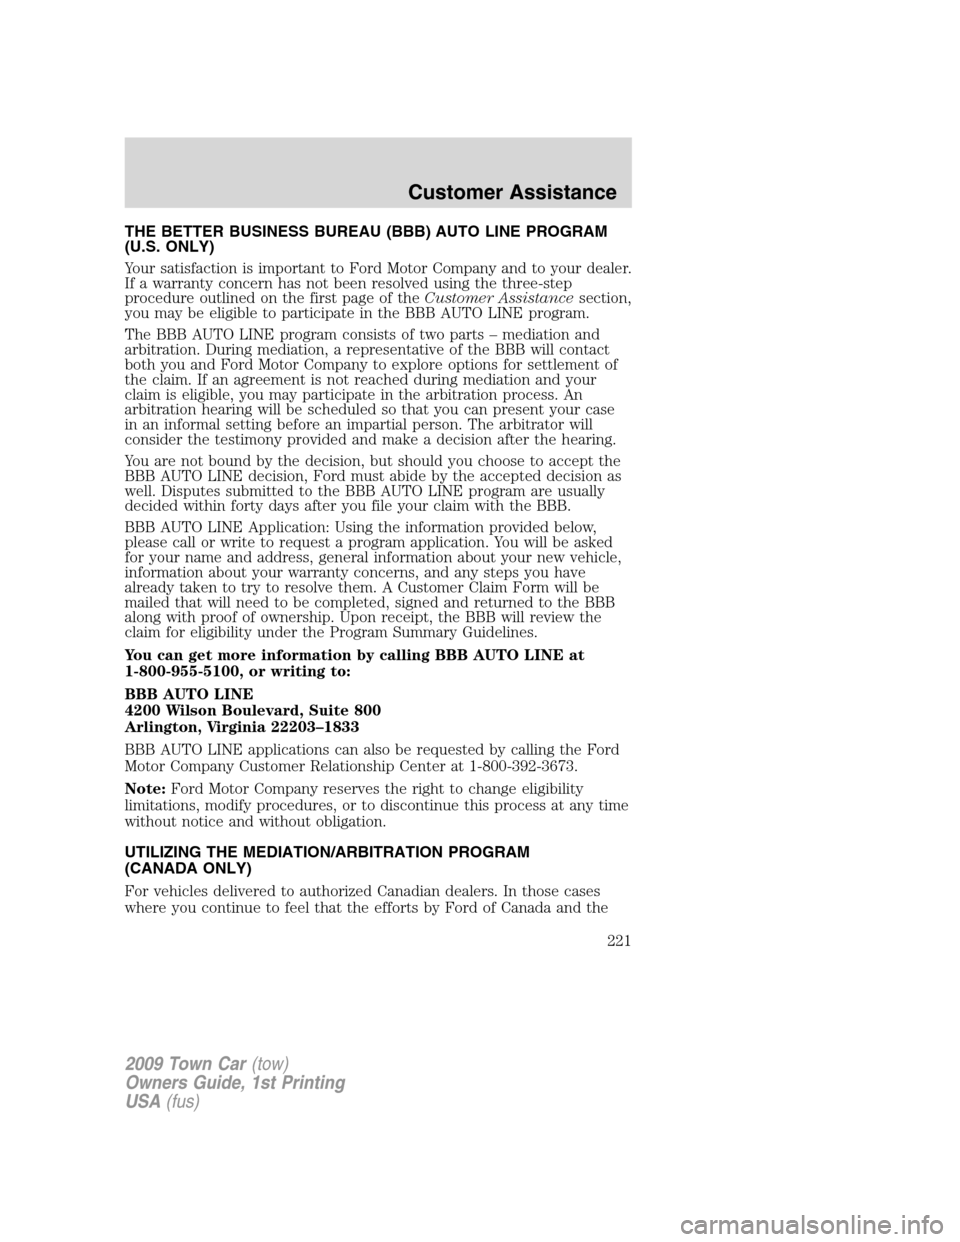 LINCOLN TOWN CAR 2009  Owners Manual THE BETTER BUSINESS BUREAU (BBB) AUTO LINE PROGRAM
(U.S. ONLY)
Your satisfaction is important to Ford Motor Company and to your dealer.
If a warranty concern has not been resolved using the three-step